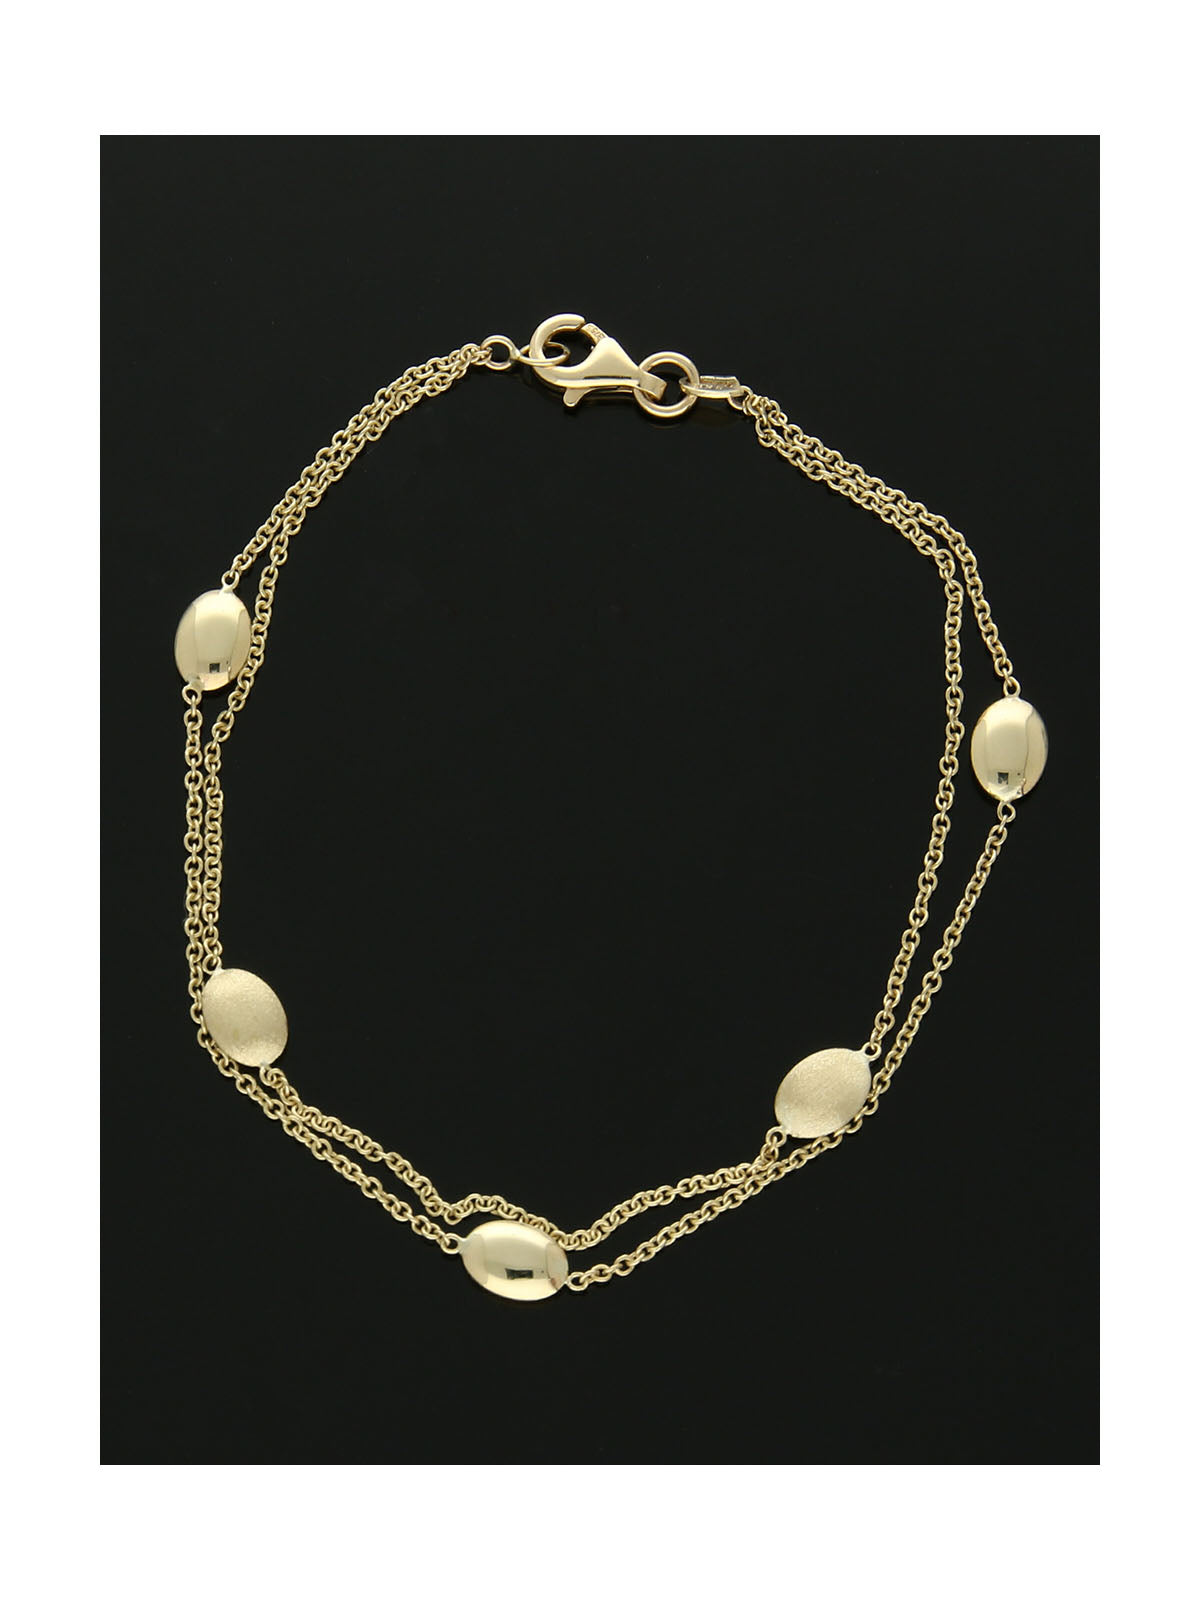 Oval Beaded Double Row Station Bracelet in 9ct Yellow Gold